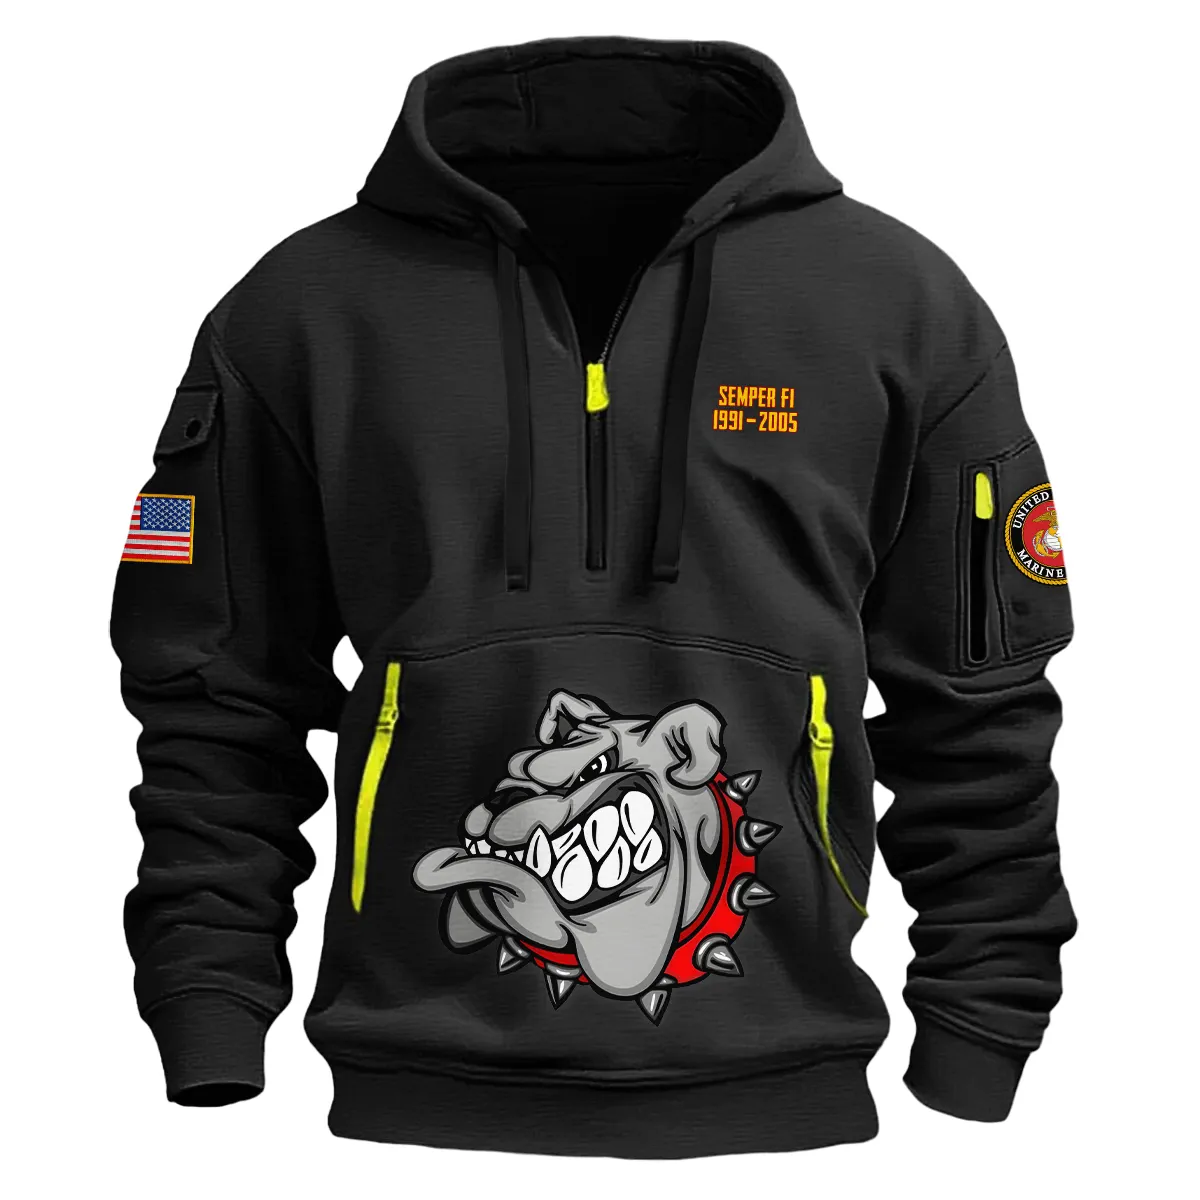 US Military All Branches! Personalized Gift U.S. Marine Corps Fashion Hoodie Half Zipper